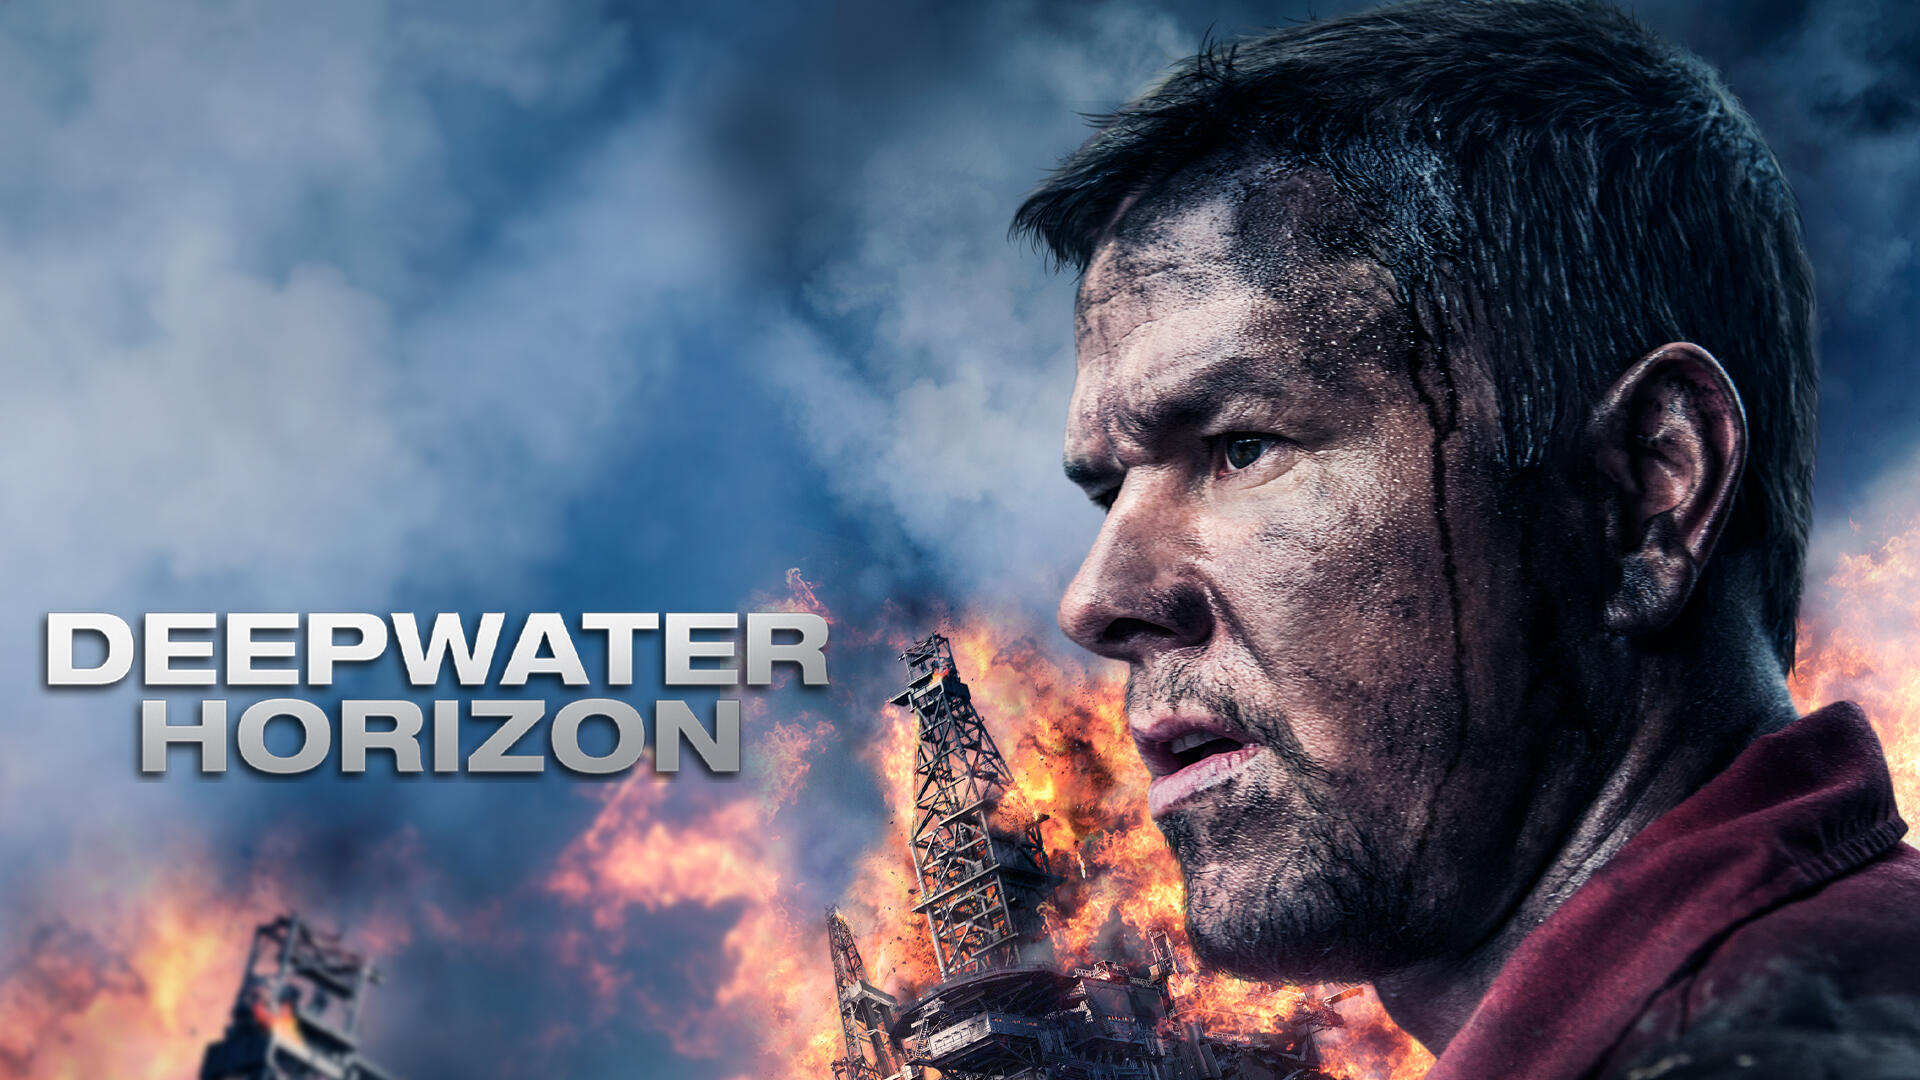 39-facts-about-the-movie-deepwater-horizon